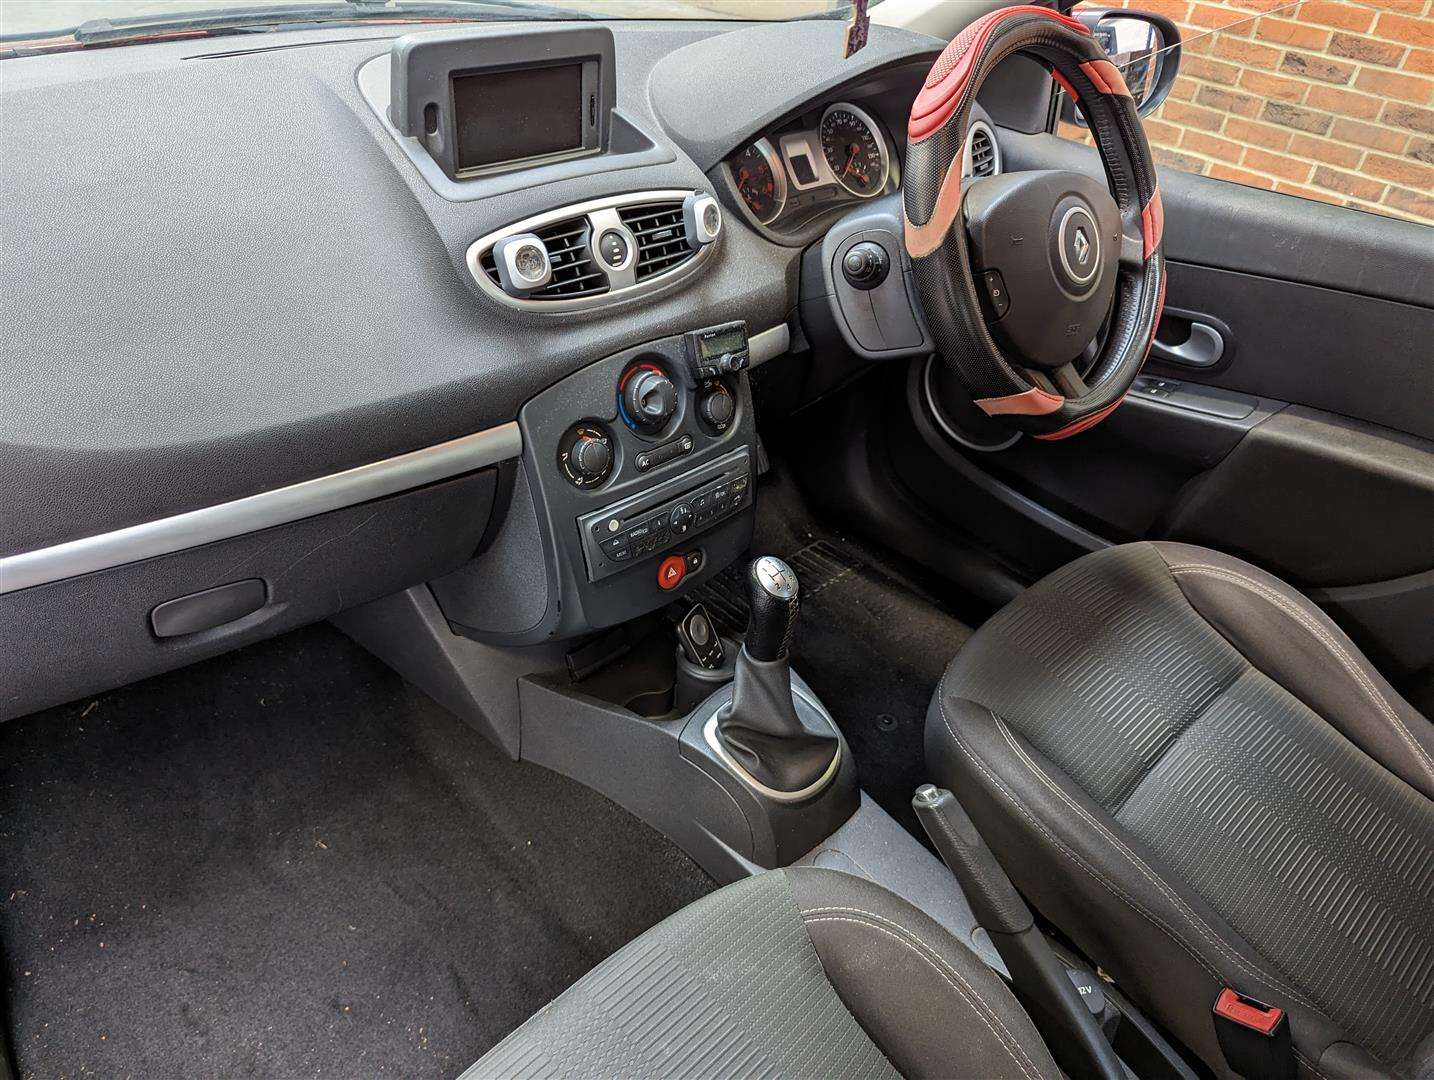 2010 RENAULT CLIO DYNAMIQUE TOMTOM DCI - Image 4 of 28